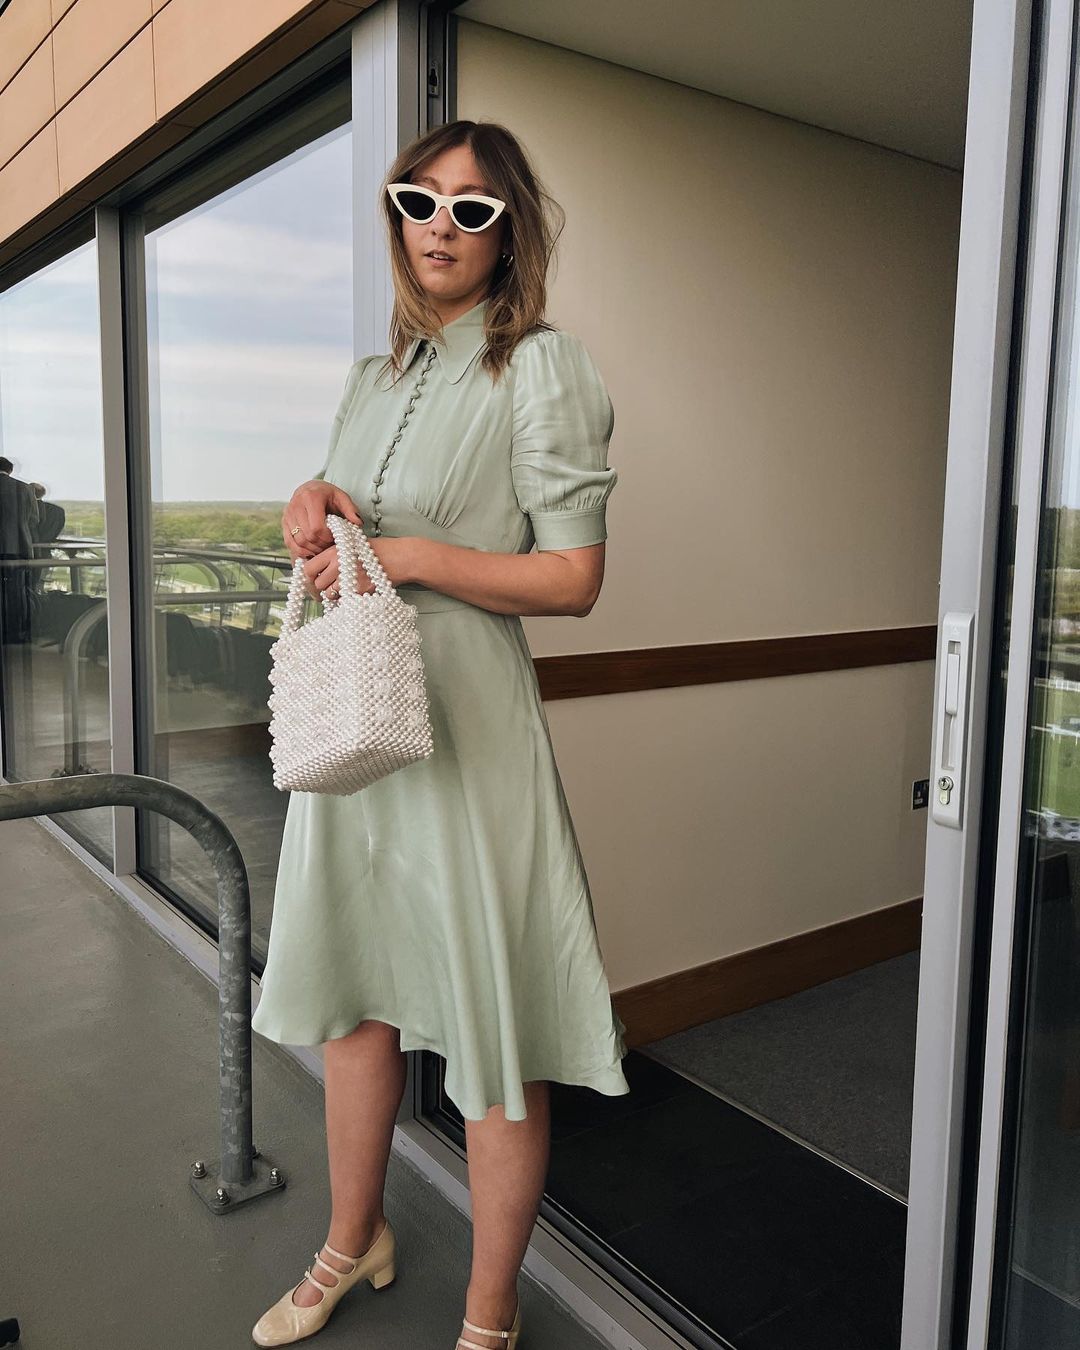 What to wear to Ascot: @bubblyaquarius wears a tea dress and Mary Janes